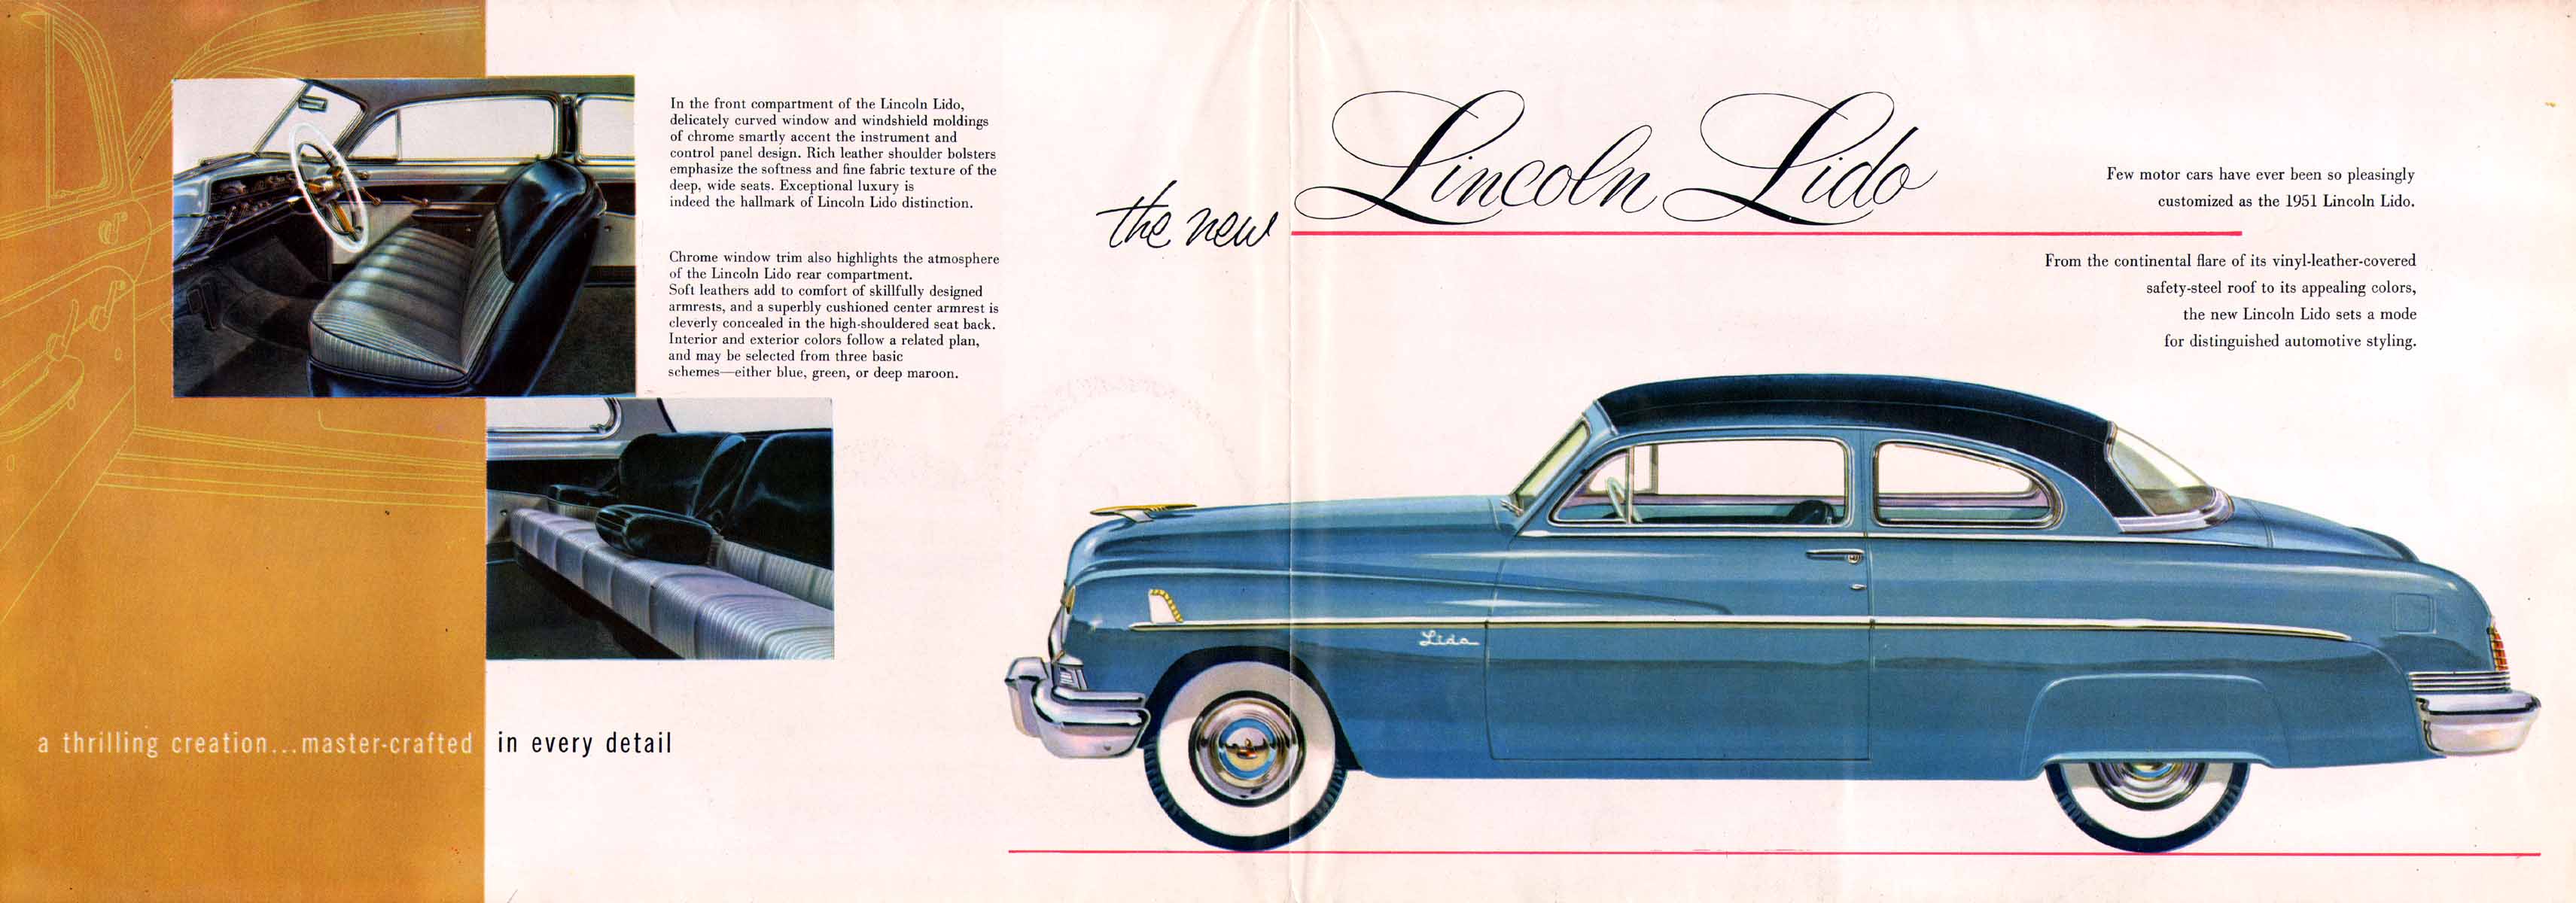 1951 Lincoln Foldout-02-03